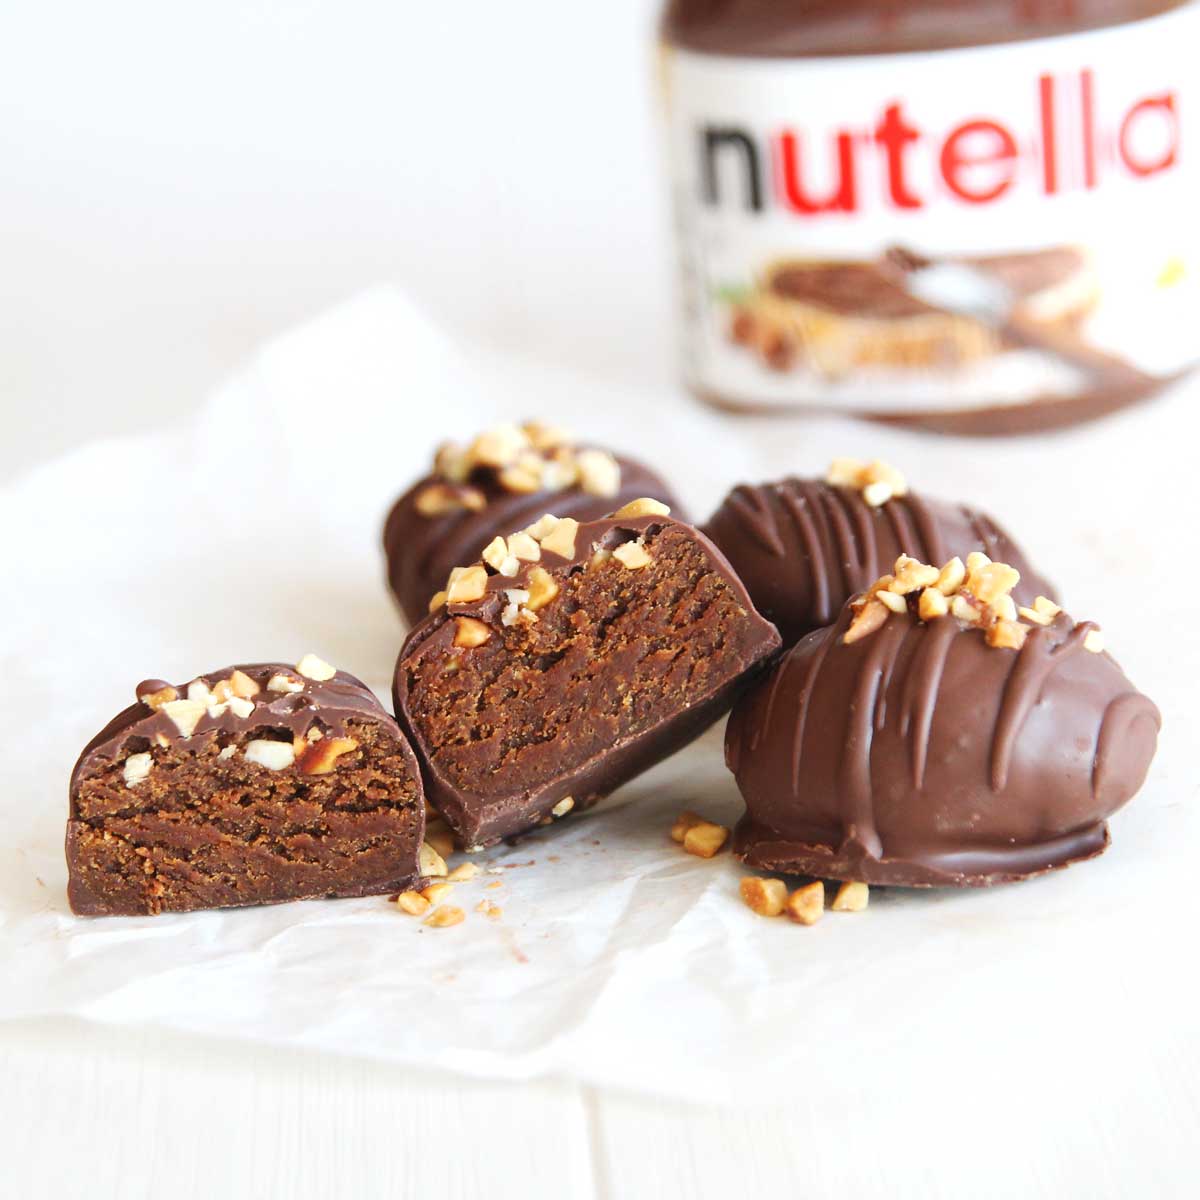 Healthier Nutella Chocolate Easter Eggs Made with PB Powder - easter eggs